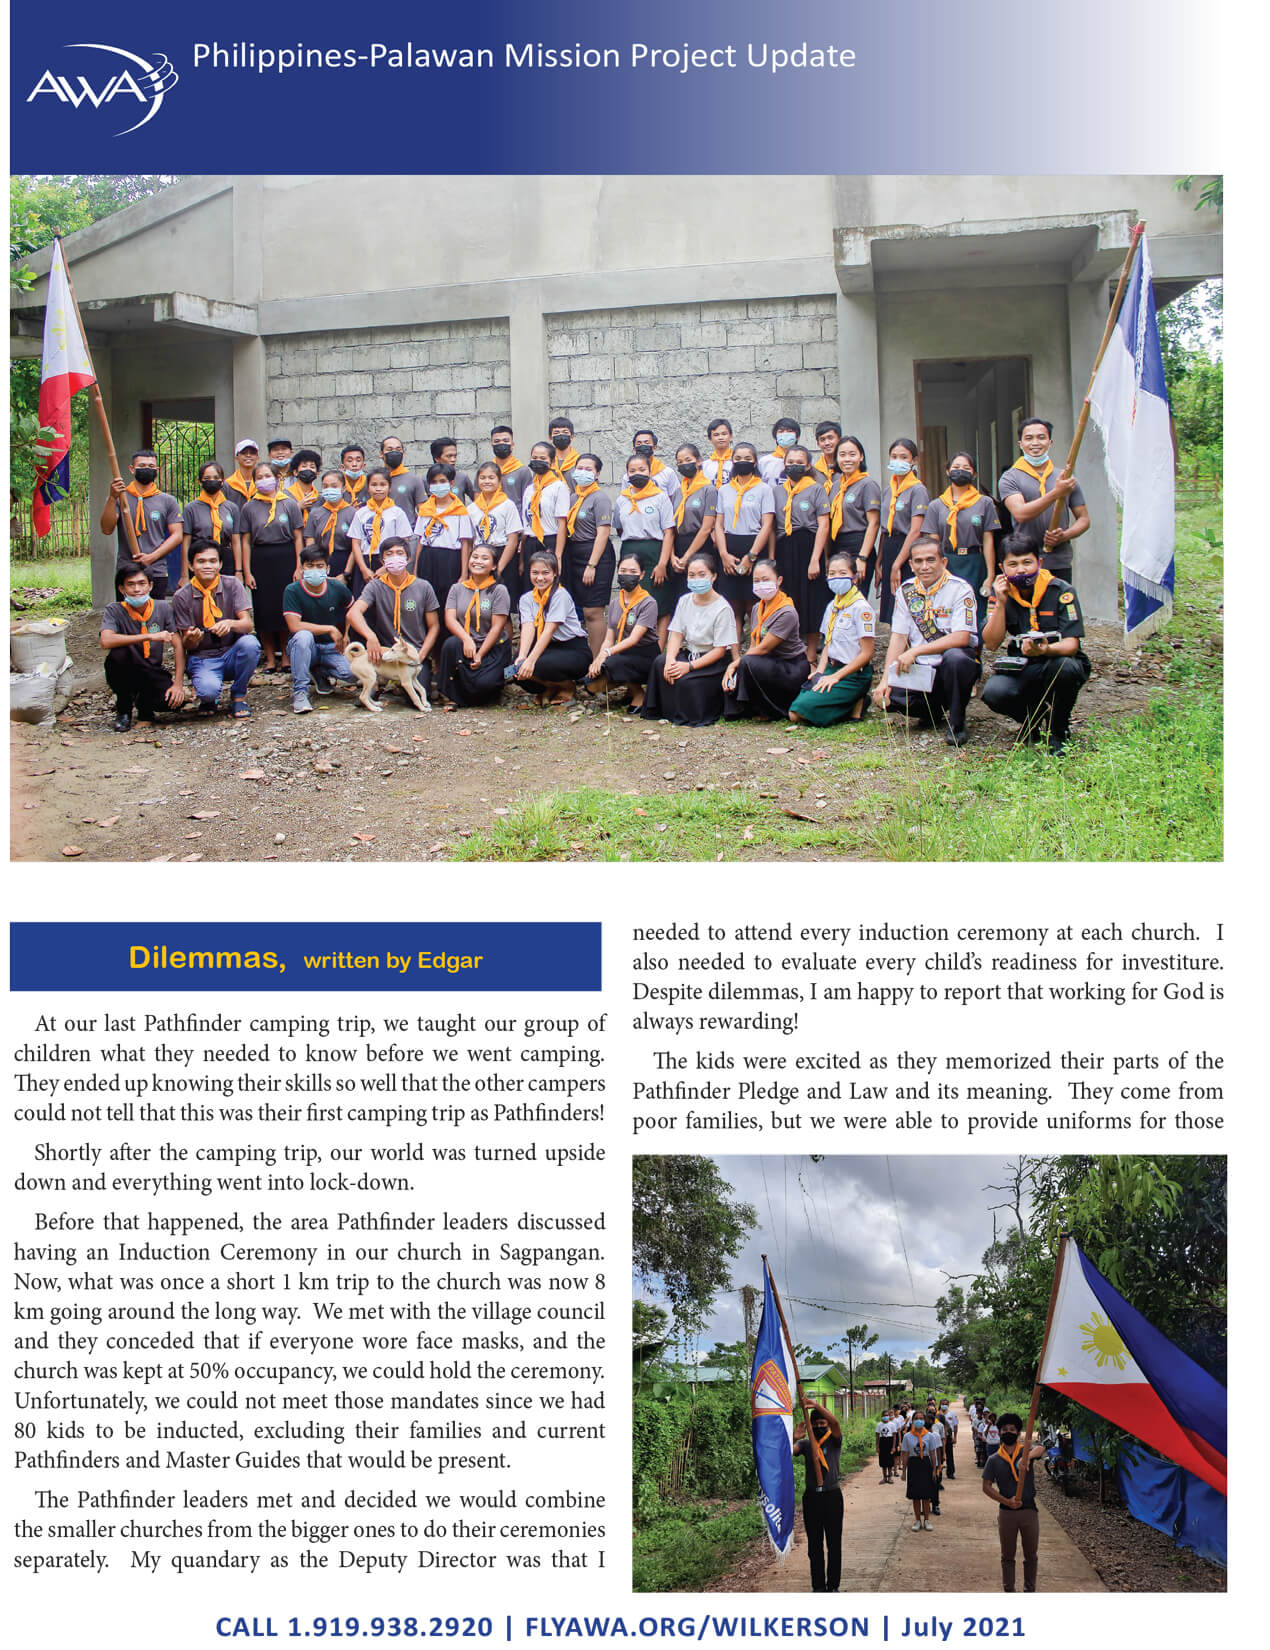 July 2021 Palawan Philippines Mission Project Update